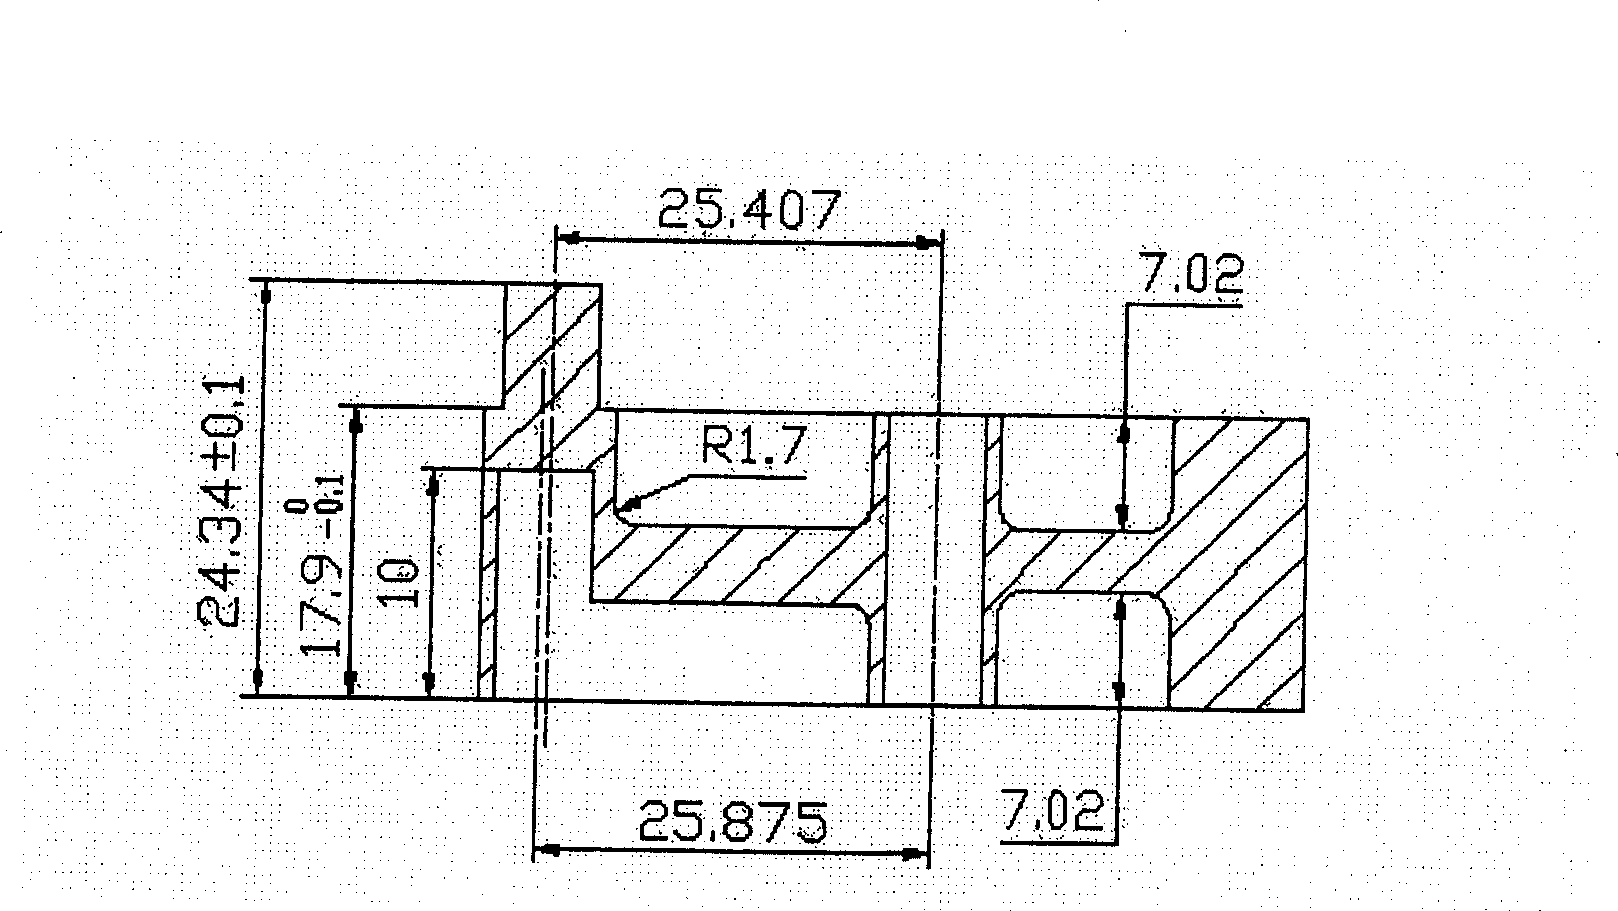 A method for preparing blades of adjustable nozzles used in a turbocharger of engines by using powders as the raw material